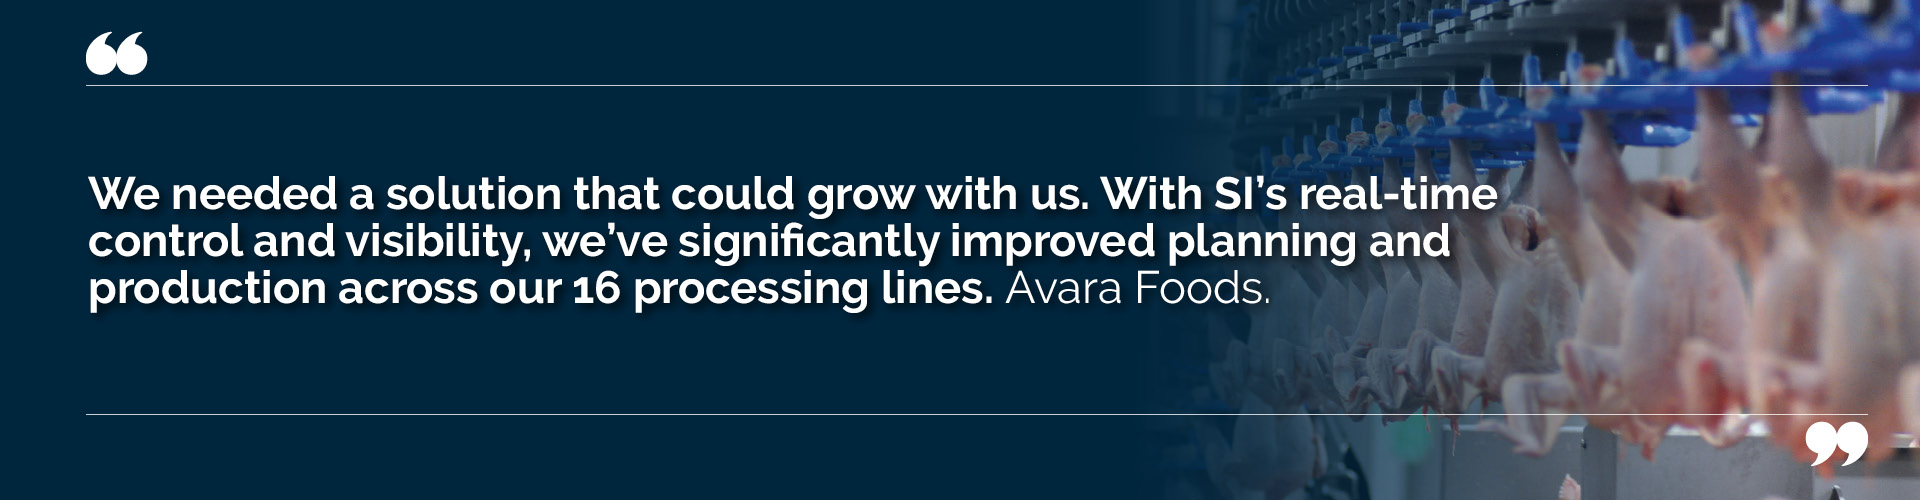 Quote from Avara Foods